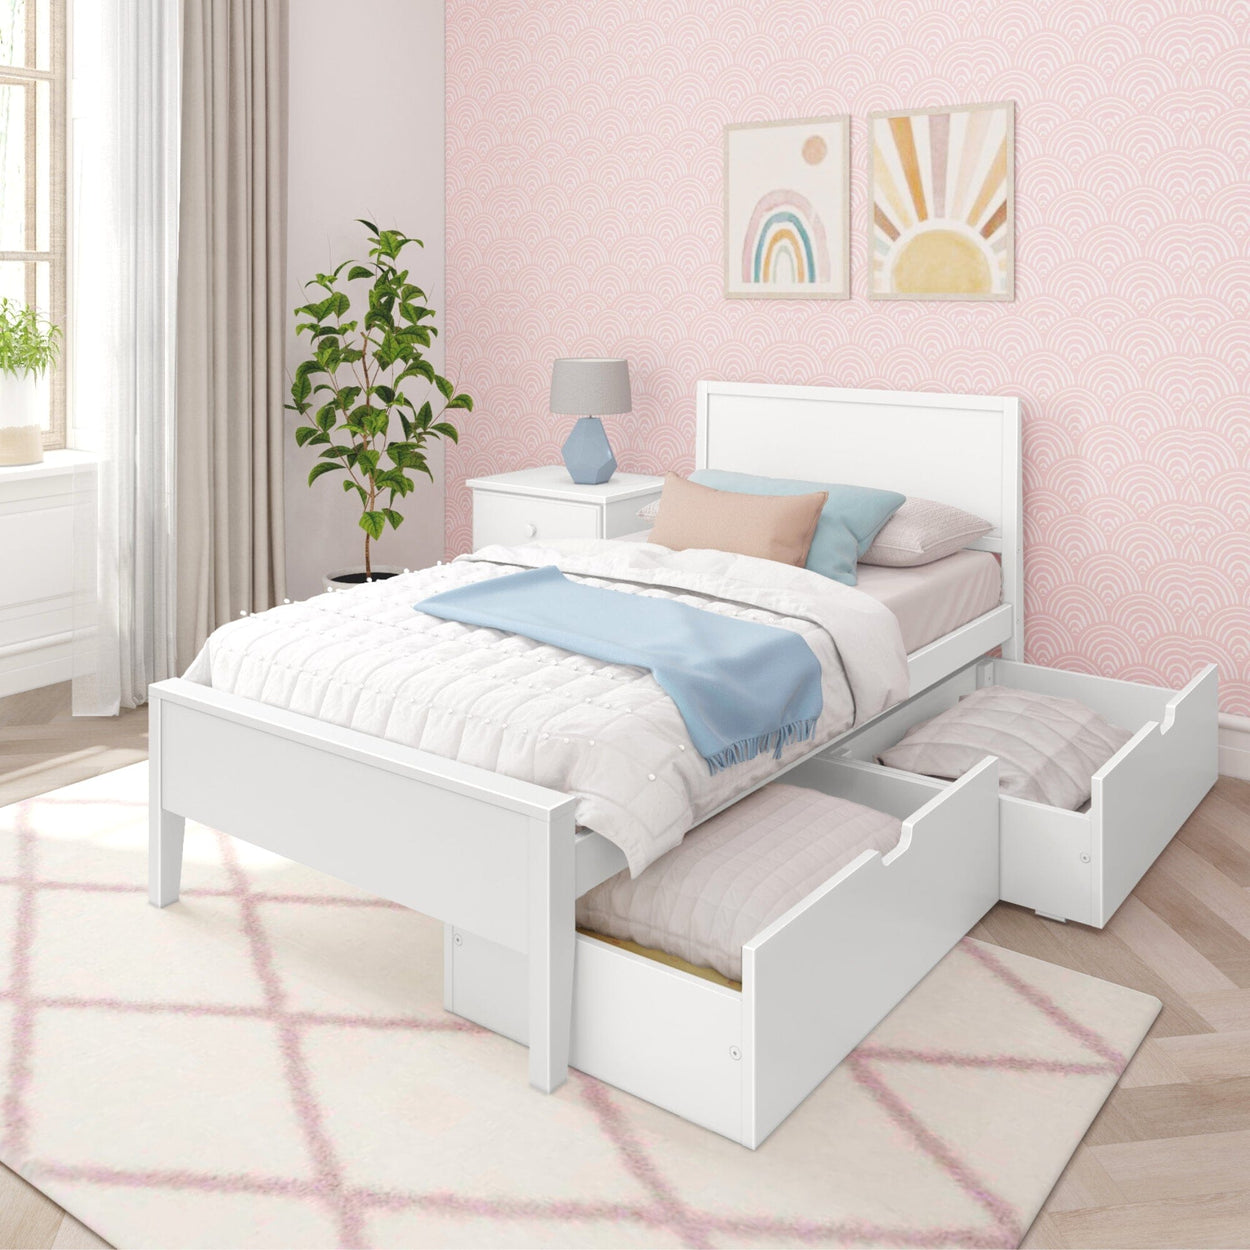 187100-002 : Kids Beds Classic Twin-Size Bed with Panel Headboard and Storage Drawers, White